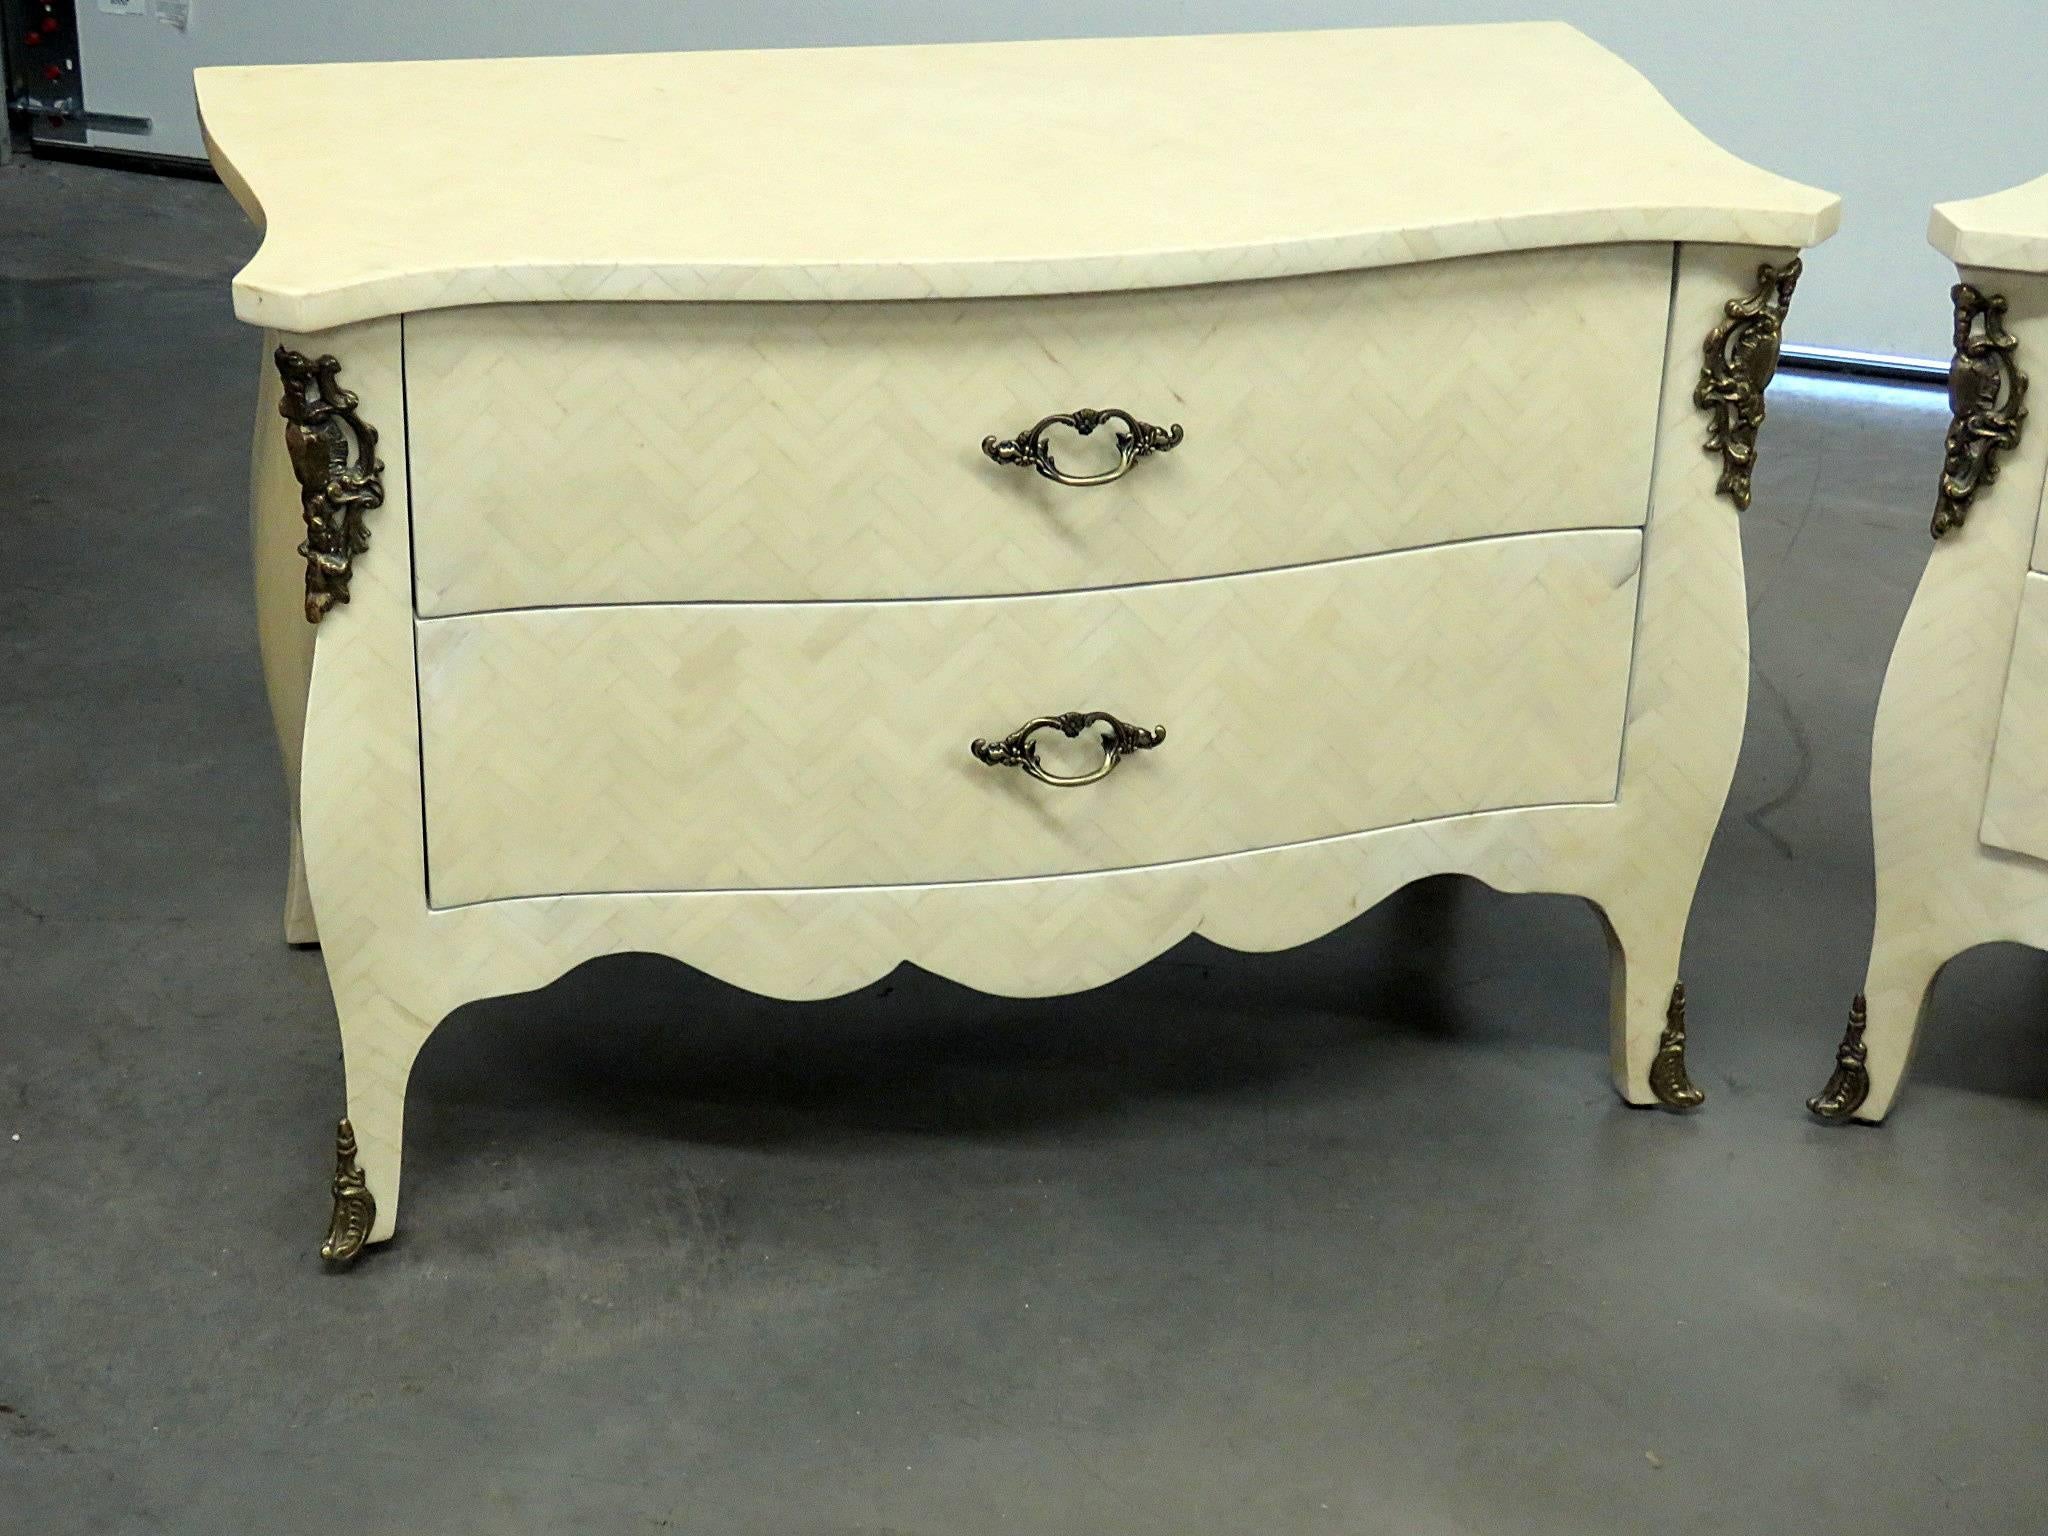 Pair of Enrique Garcia two-drawer commodes with faux bone veneer and bronze accents.